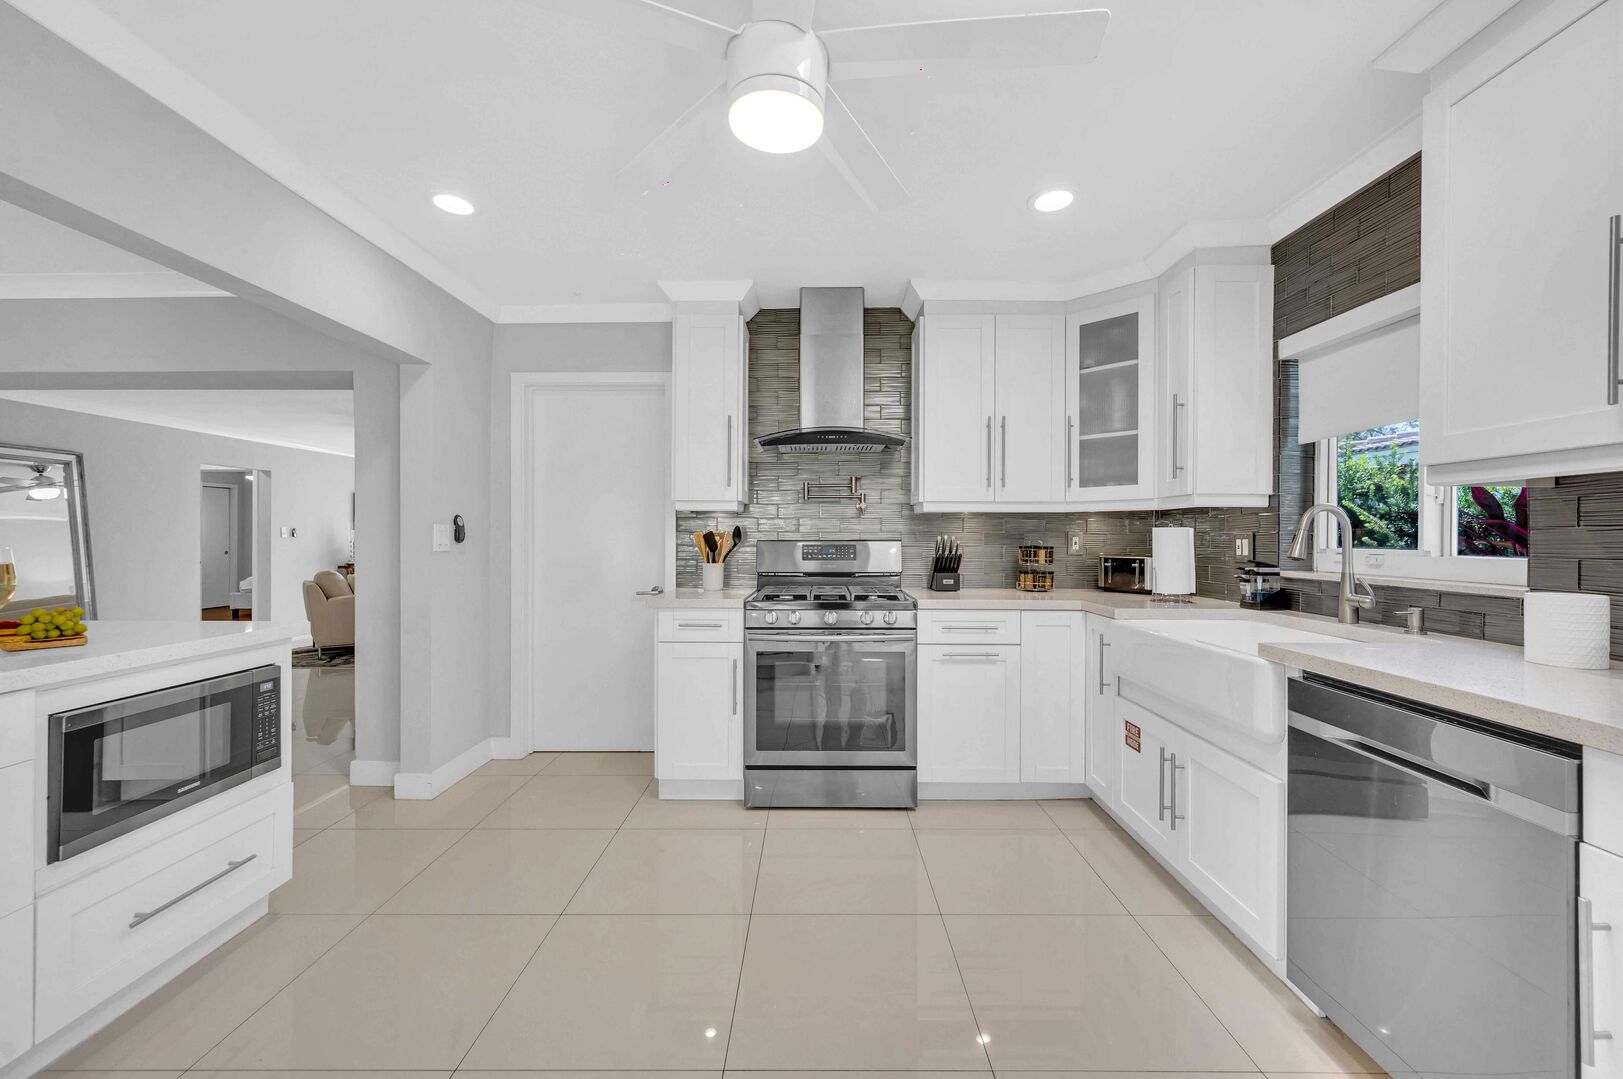 The large open kitchen is equipped with state of the art appliances for every gourmet chef. Extra counter space and a perfect view of the living room, dining room, and backyard oasis.